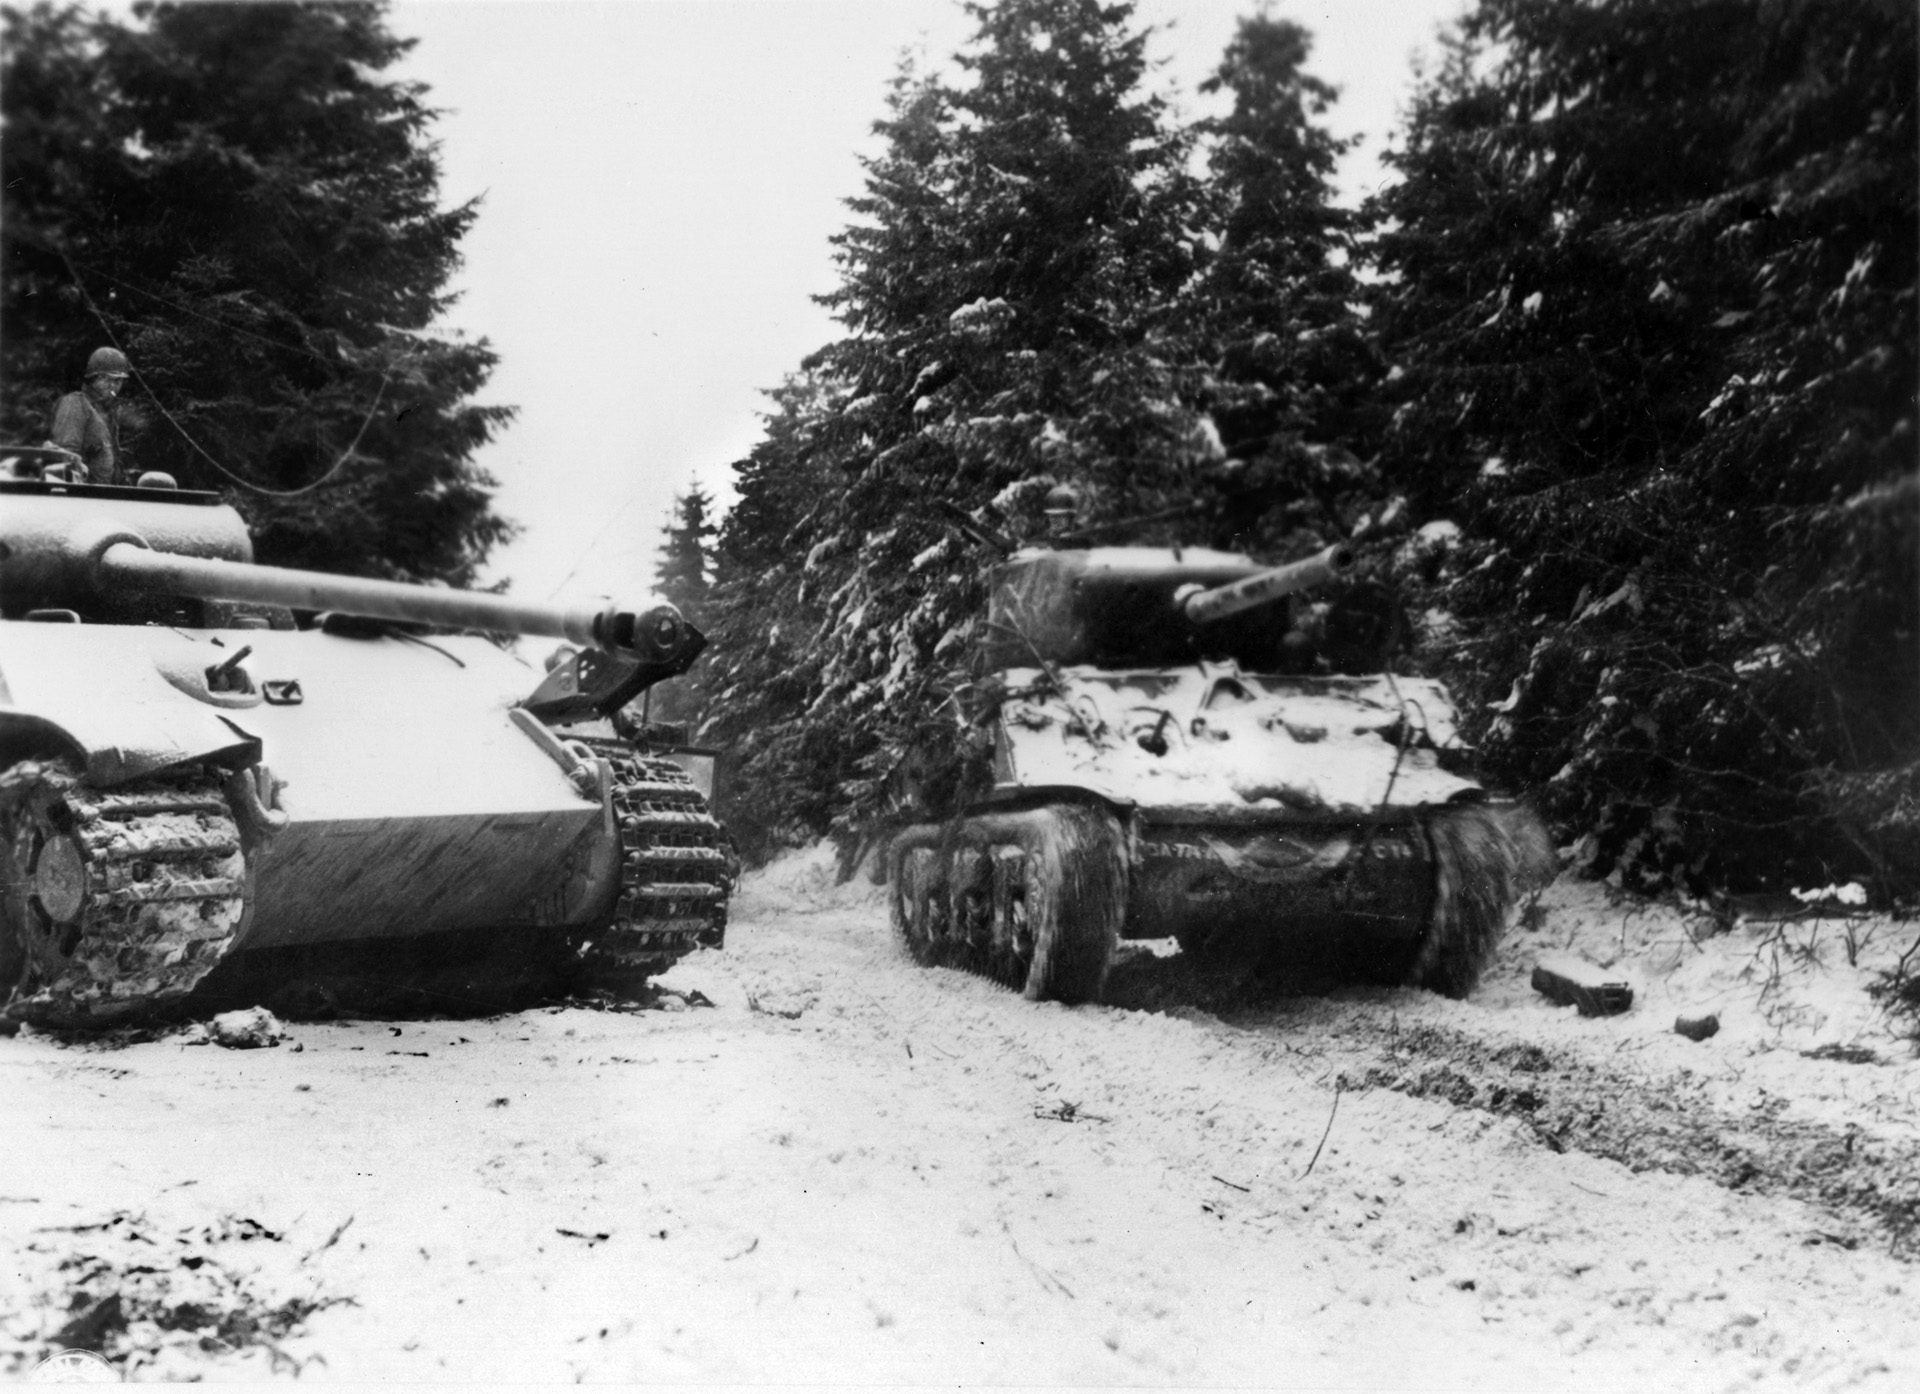 Forging ahead, tanks of the U.S. Third Armored Division pass a disabled German PzKpfw. V Panther medium tank that had been abandoned by retreating Germans. The Panther, with its high-velocity 75mm cannon, is considered by many to be the best tank of World War II.